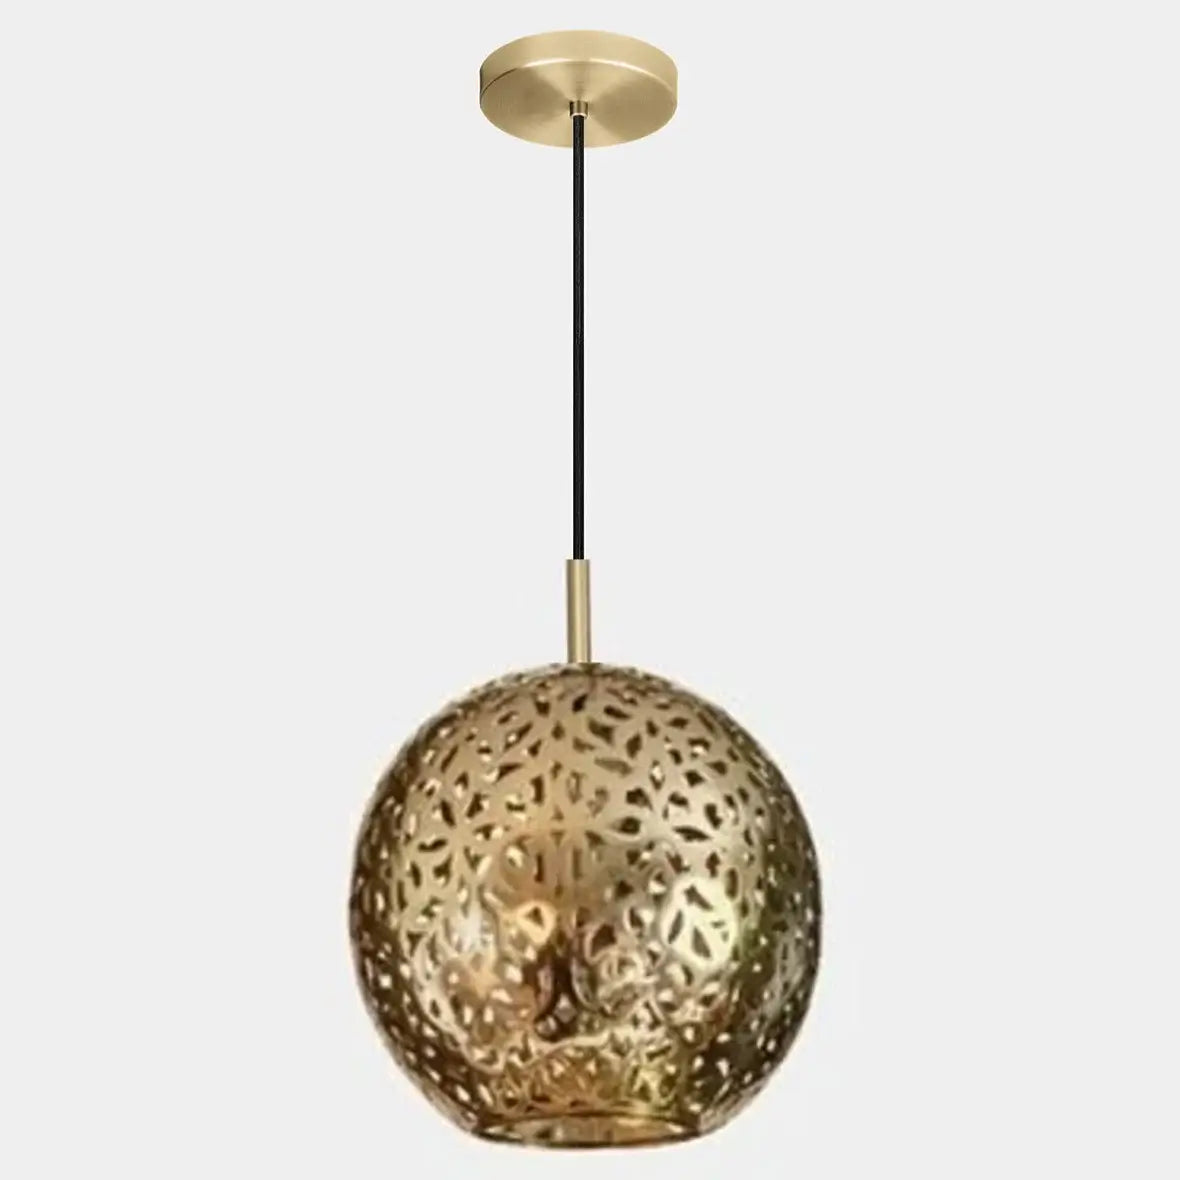 Dounia home Pendant light in antique brass   made of Metal, Model: Riad  single